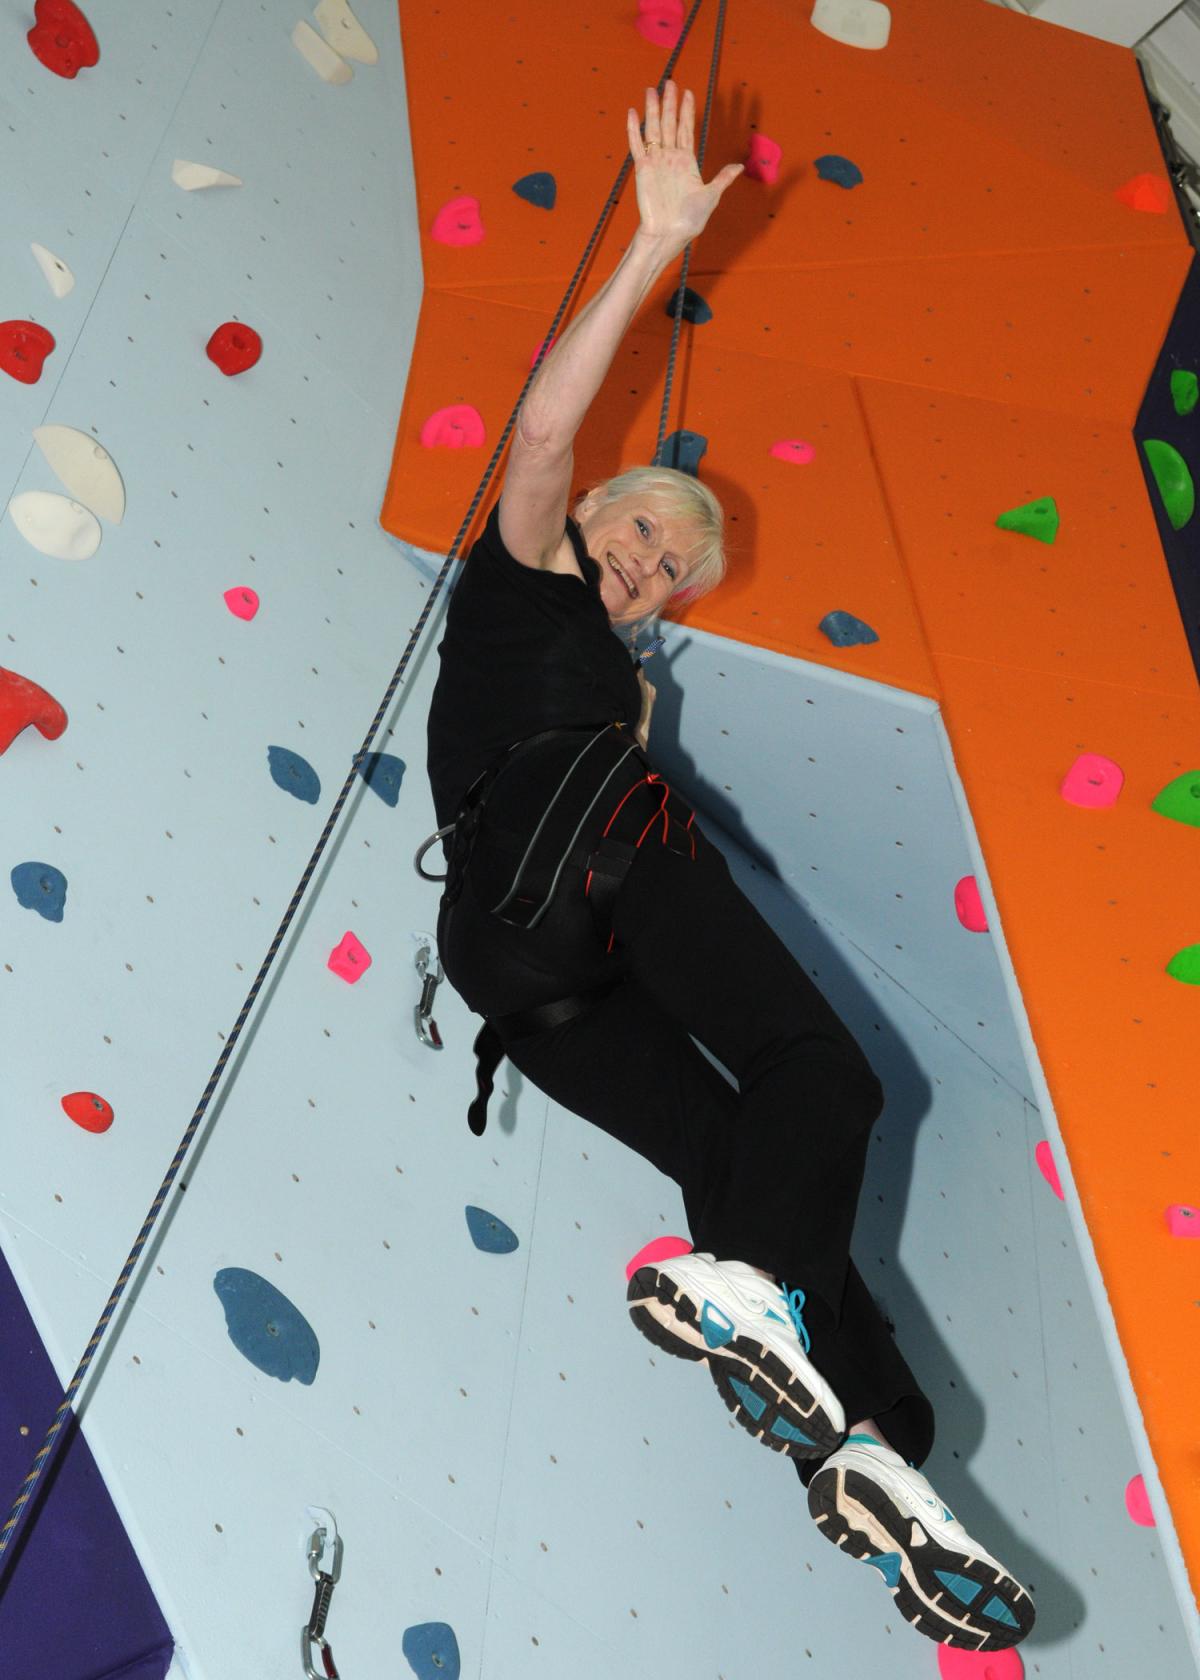 Climbing wall, Wycombe Leisure Centre - ARM Images